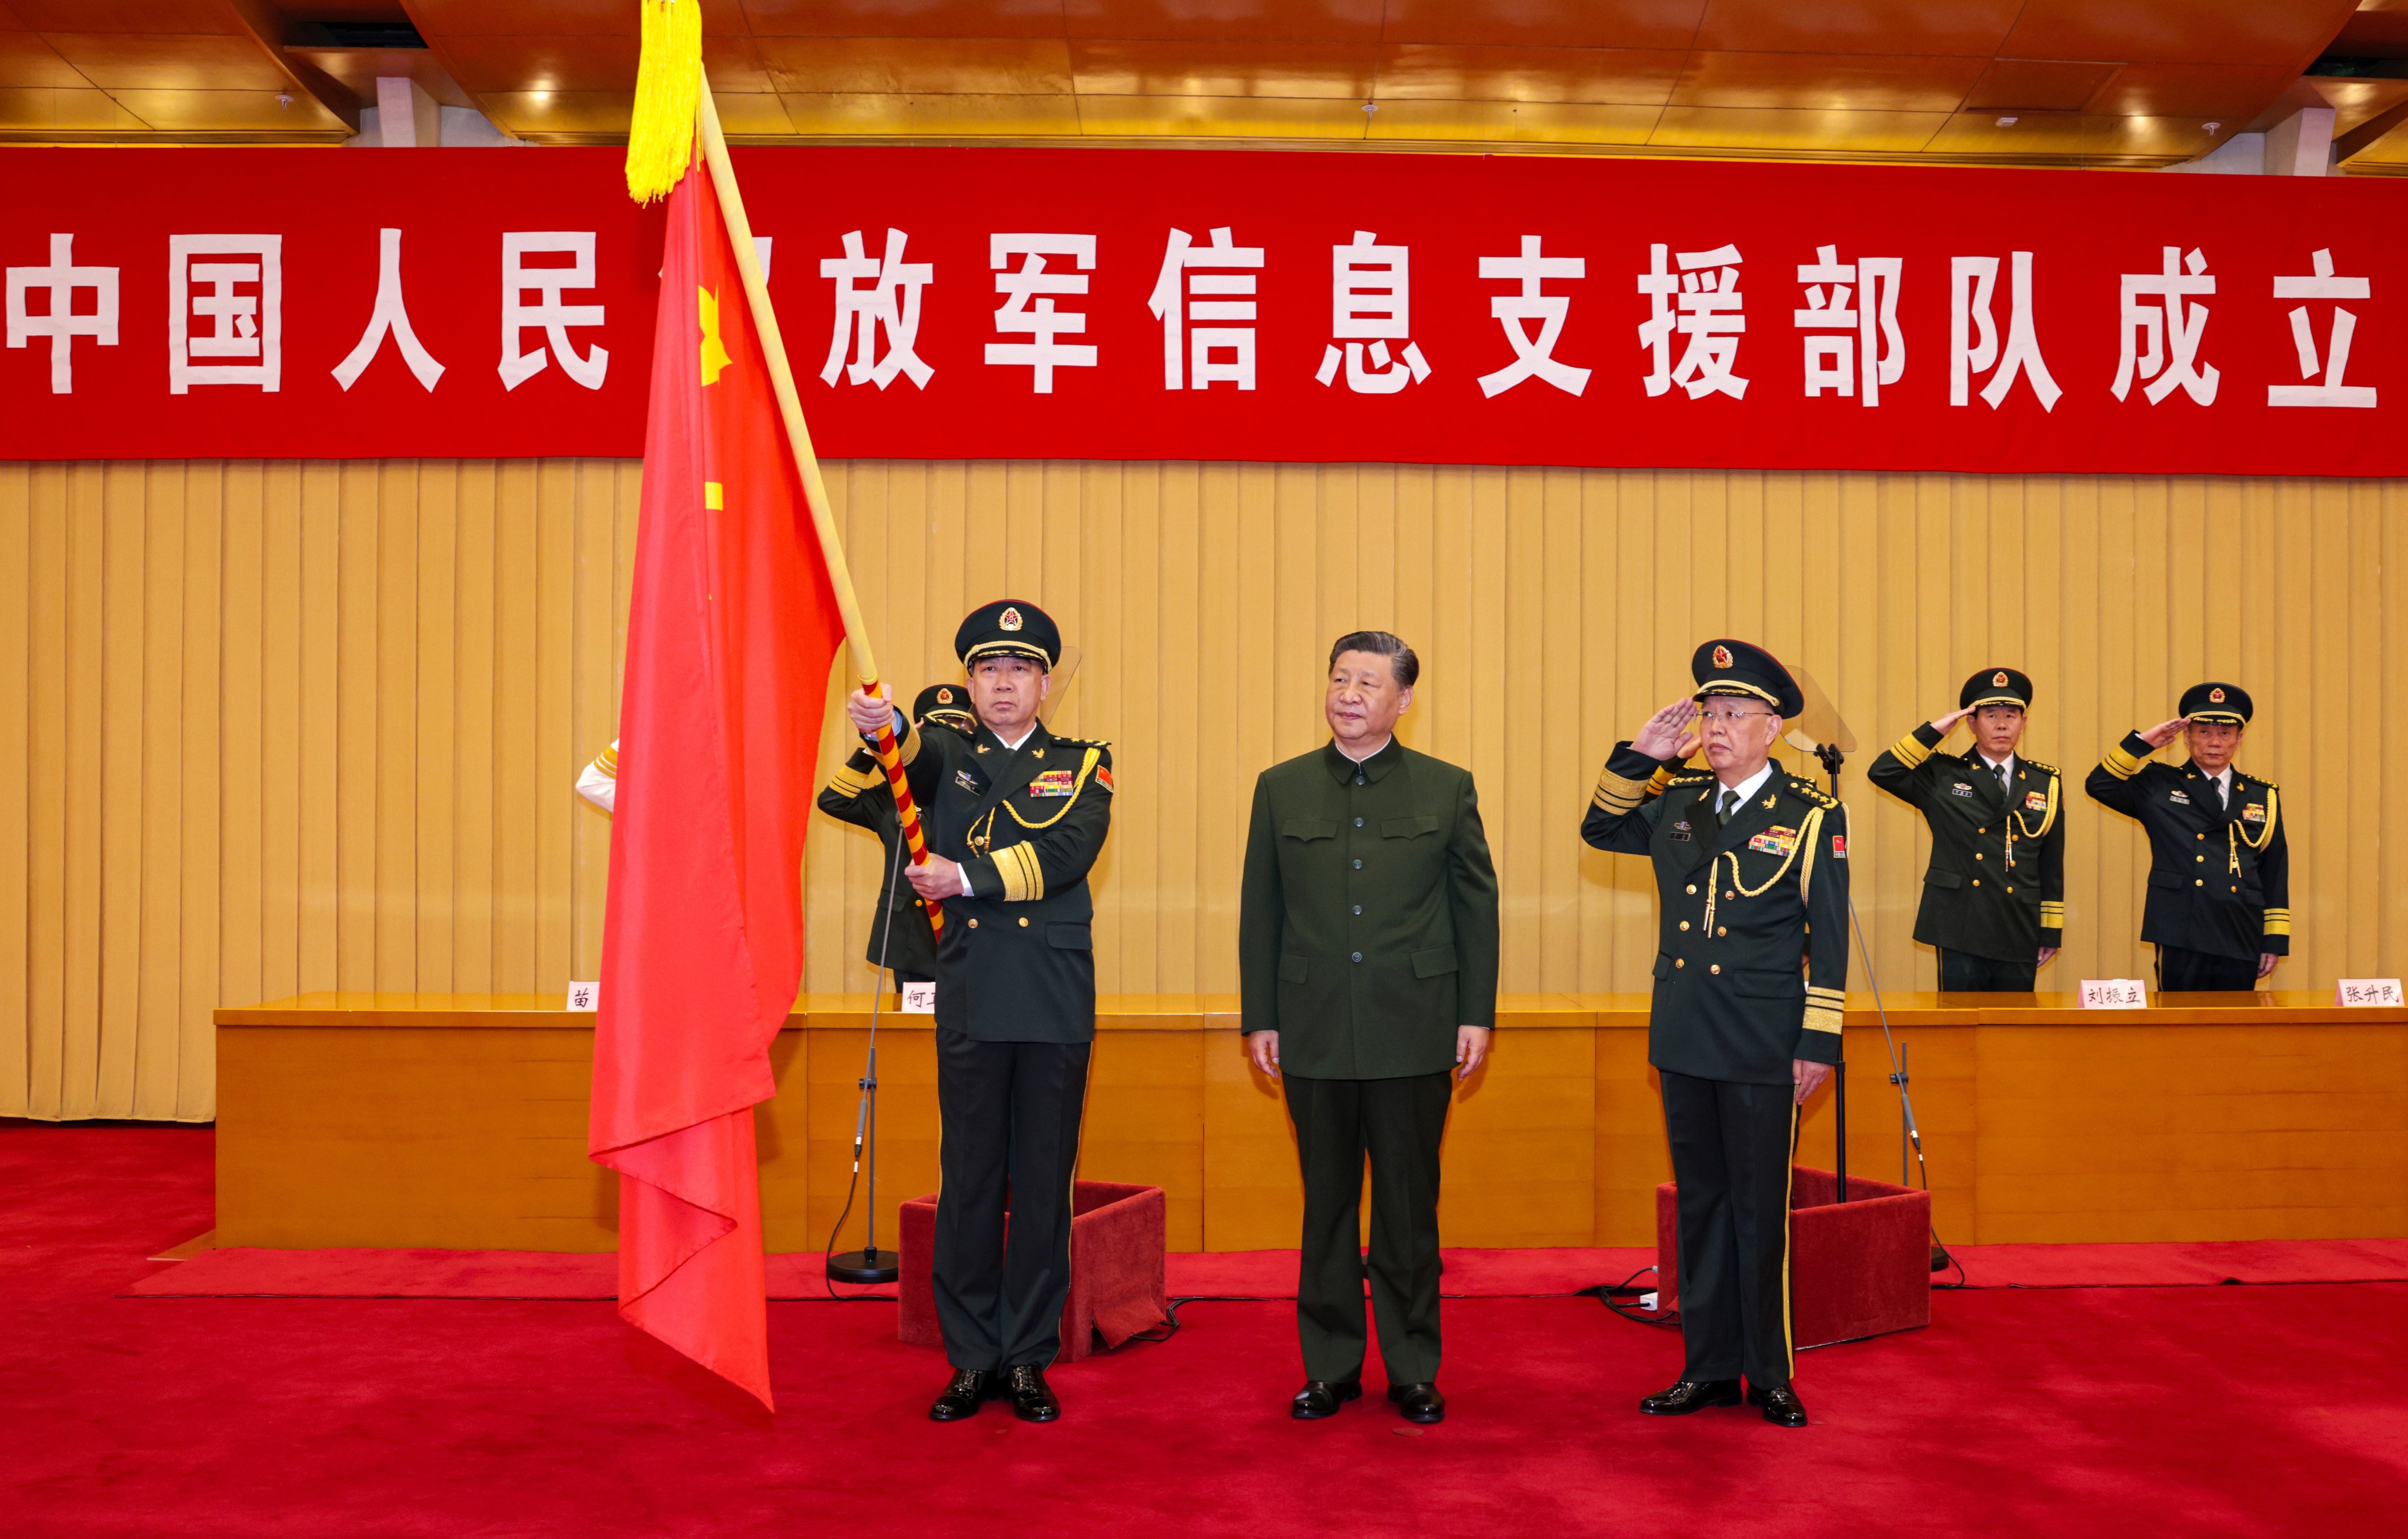 The new force was inaugurated on Friday. Photo: Xinhua